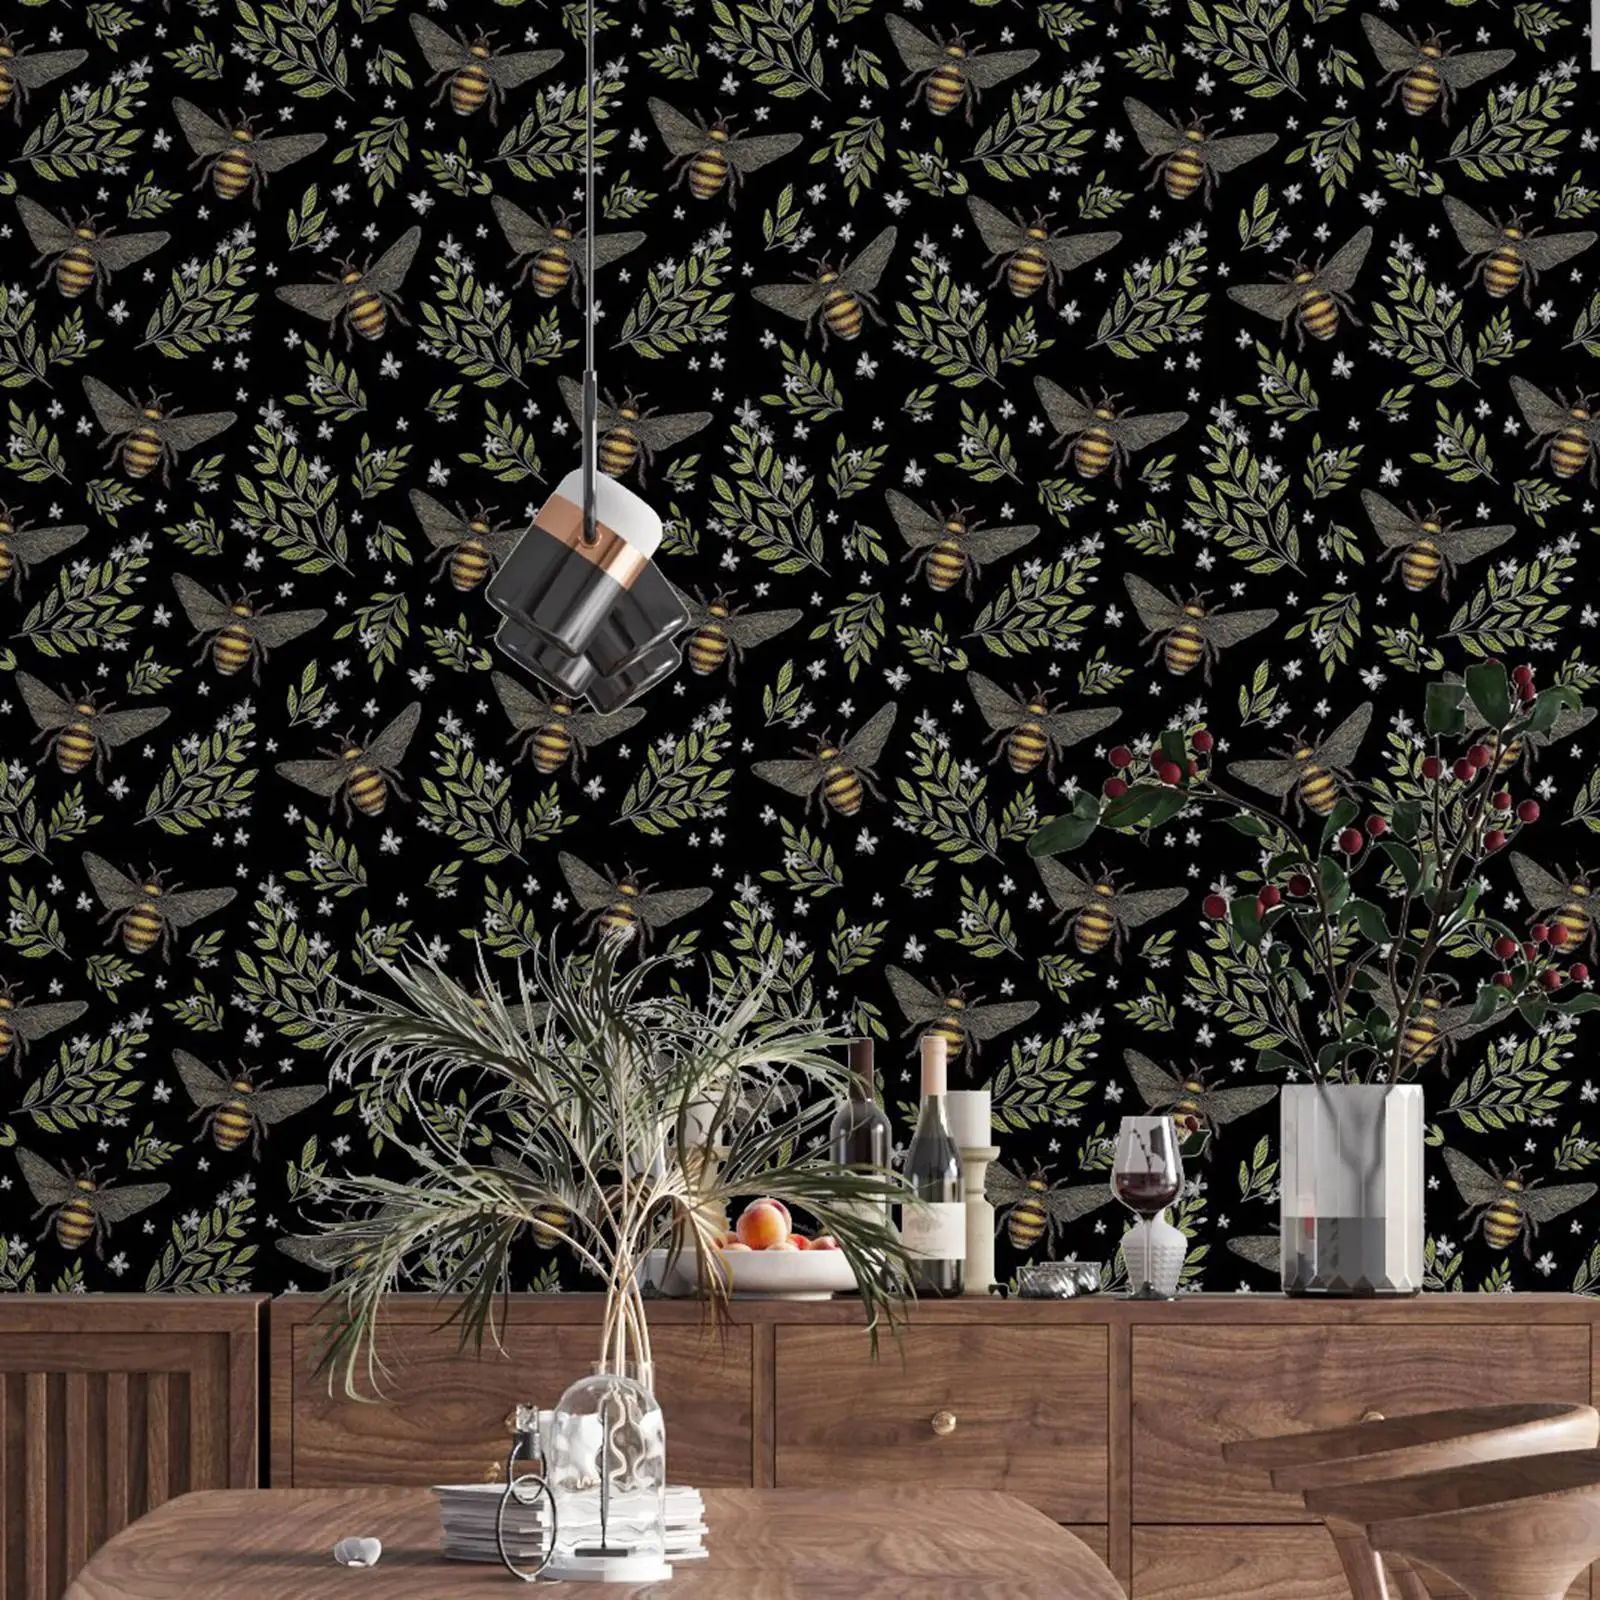 Spring Bee Removable Wallpaper in Midnight Black, Honey Bee Wall Paper in black back ground for living room bedroom HB0624001 spring bee removable wallpaper in midnight black honey bee wall paper in black back ground for living room bedroom hb0624001